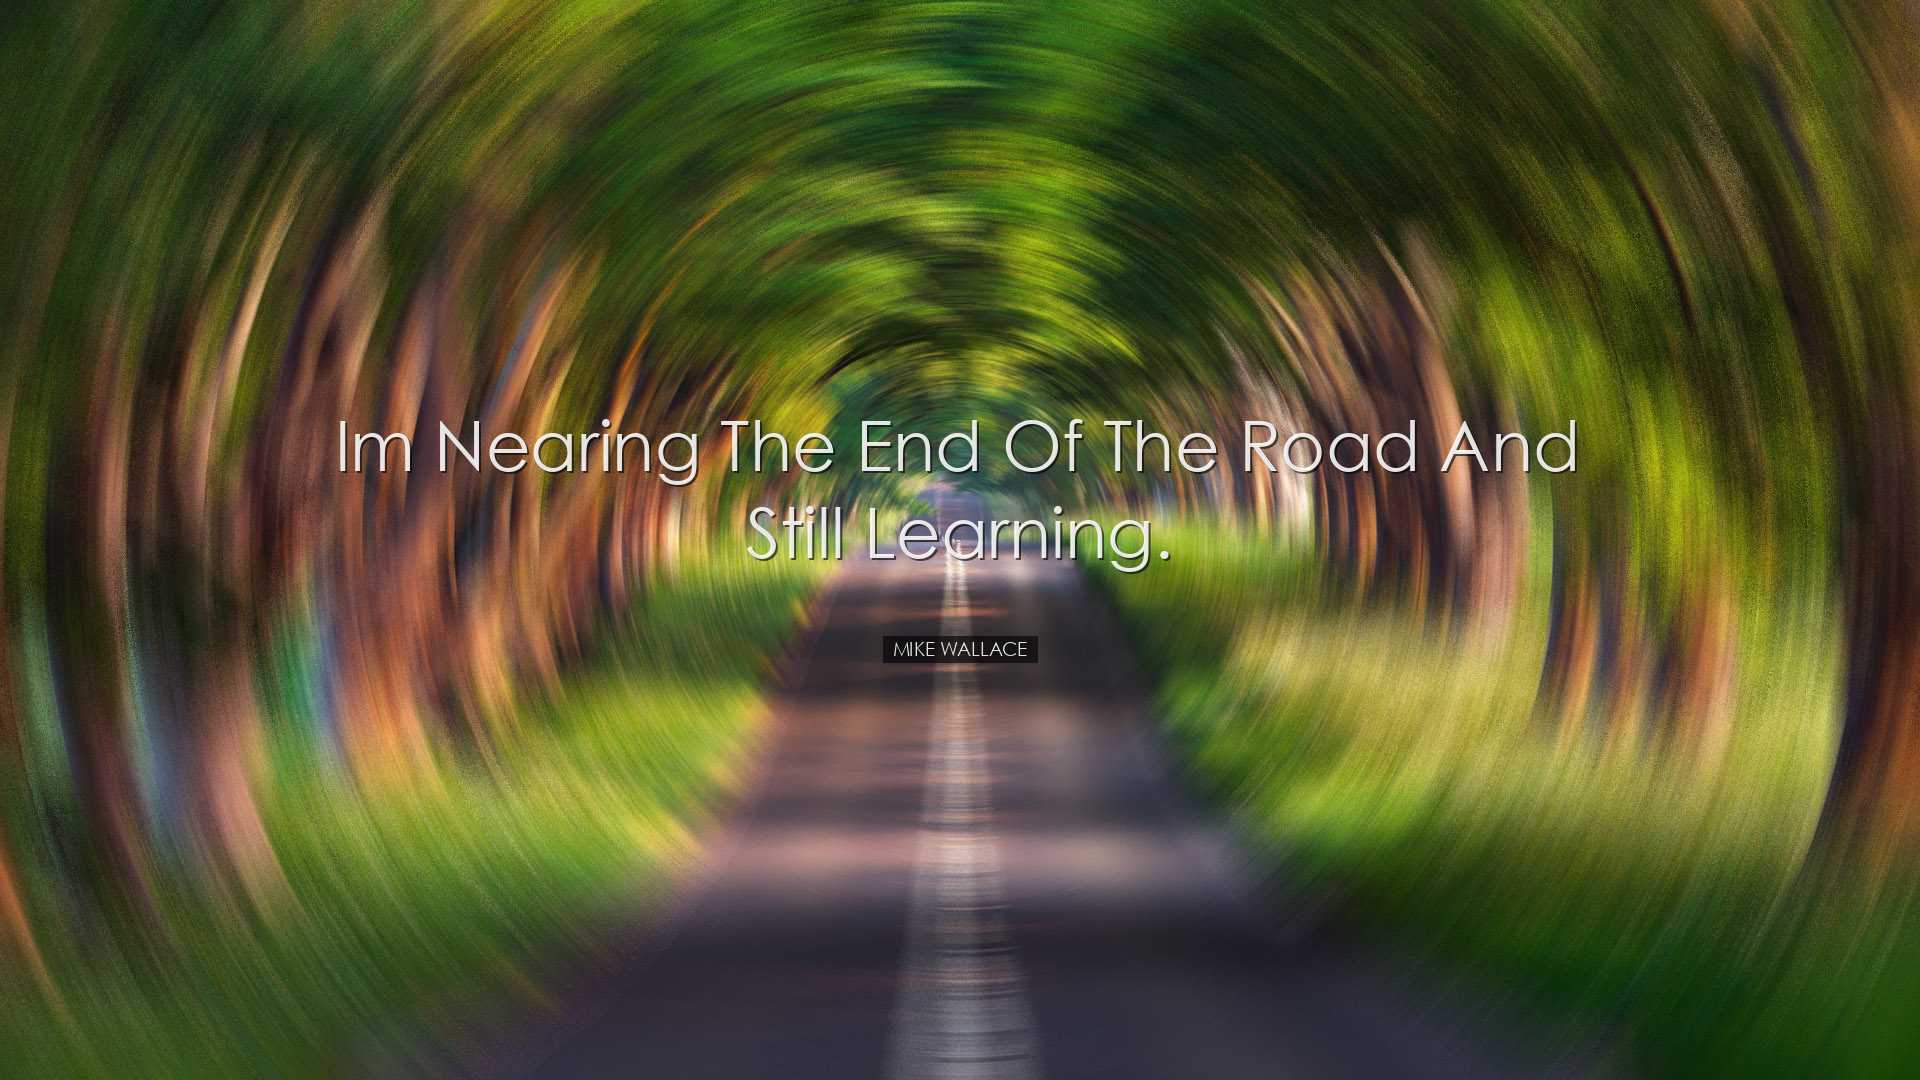 Im nearing the end of the road and still learning. - Mike Wallace